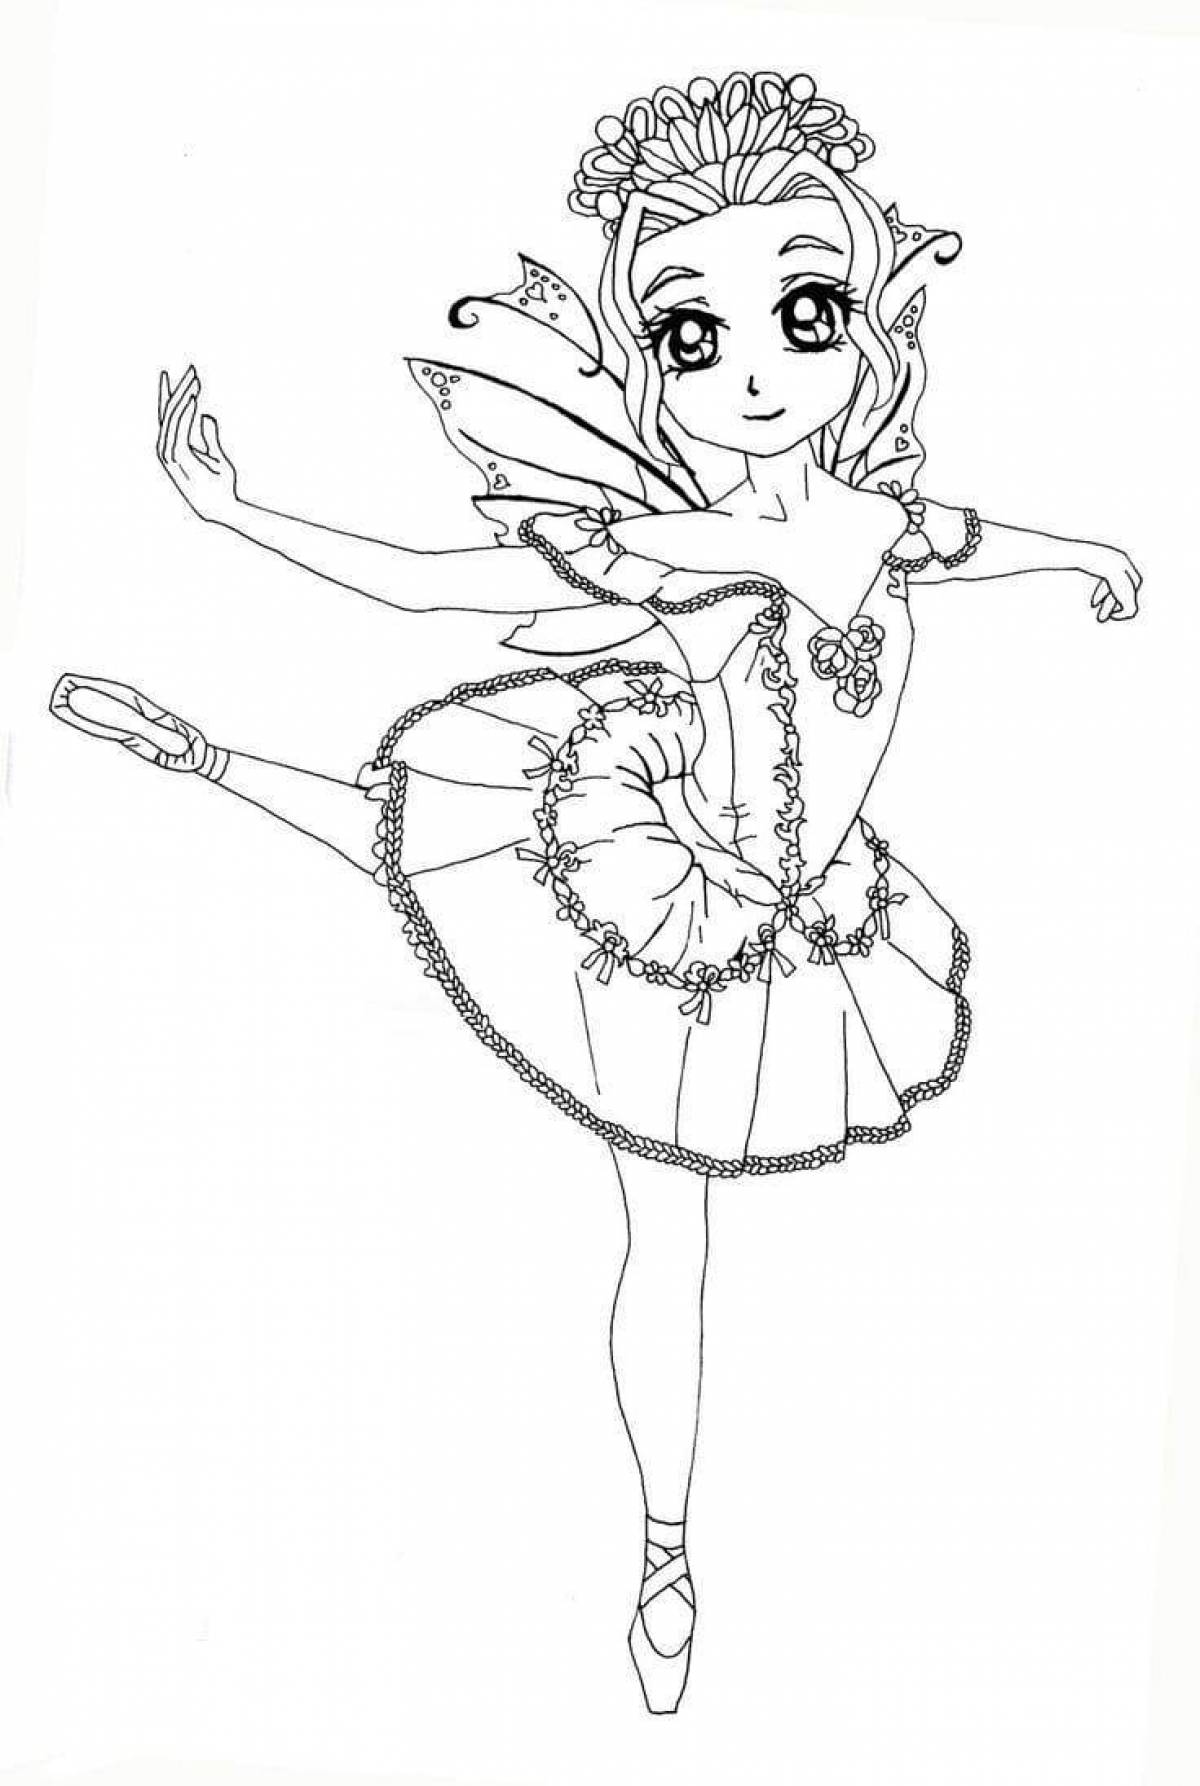 Joyful ballerina coloring pages for kids